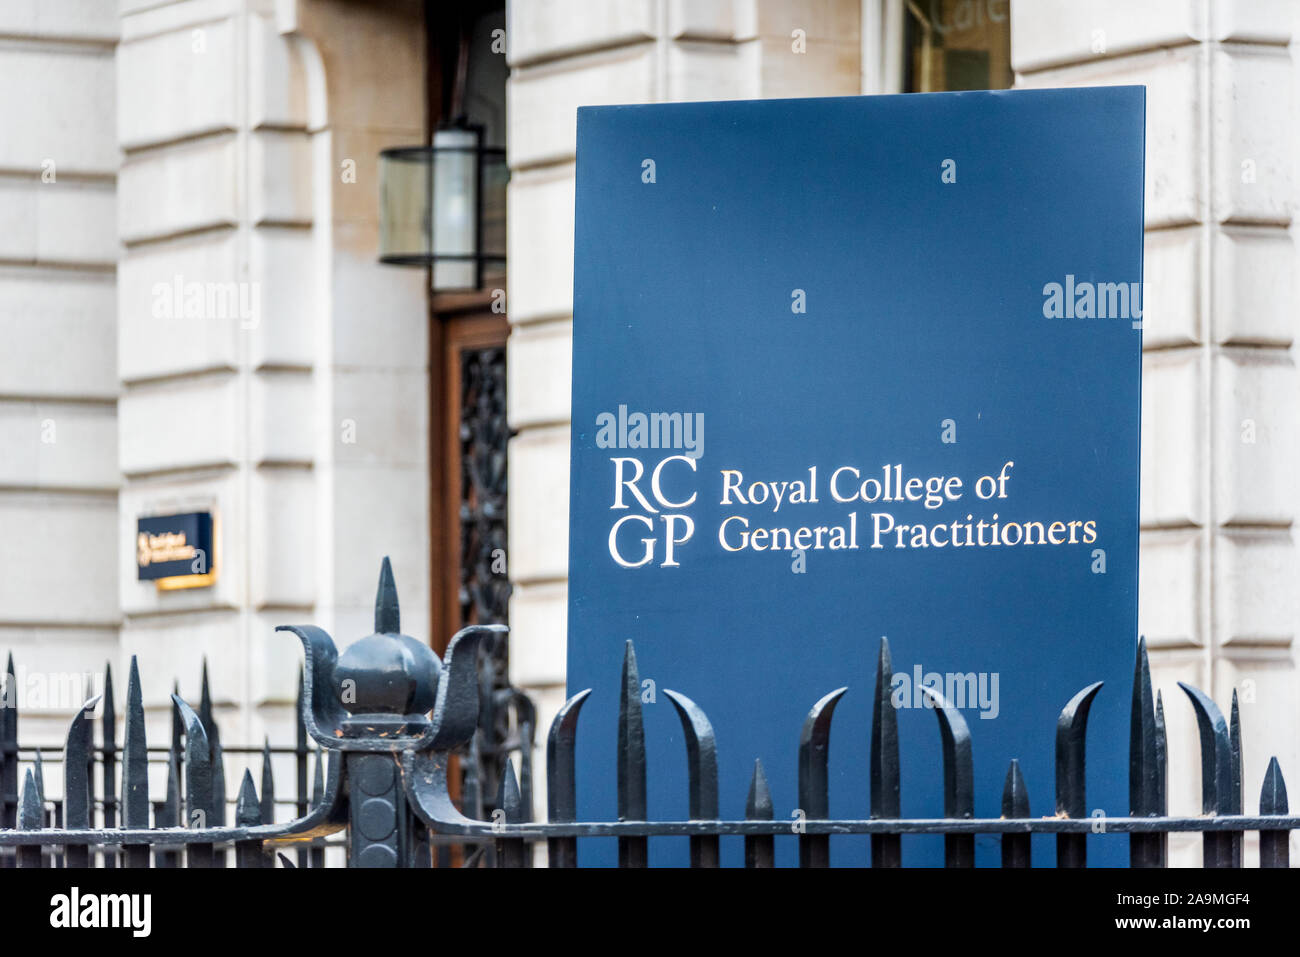 RCGP HQ - The Royal College of General Practitioners HQ, GPS College, on Euston Square Central London UK Stockfoto